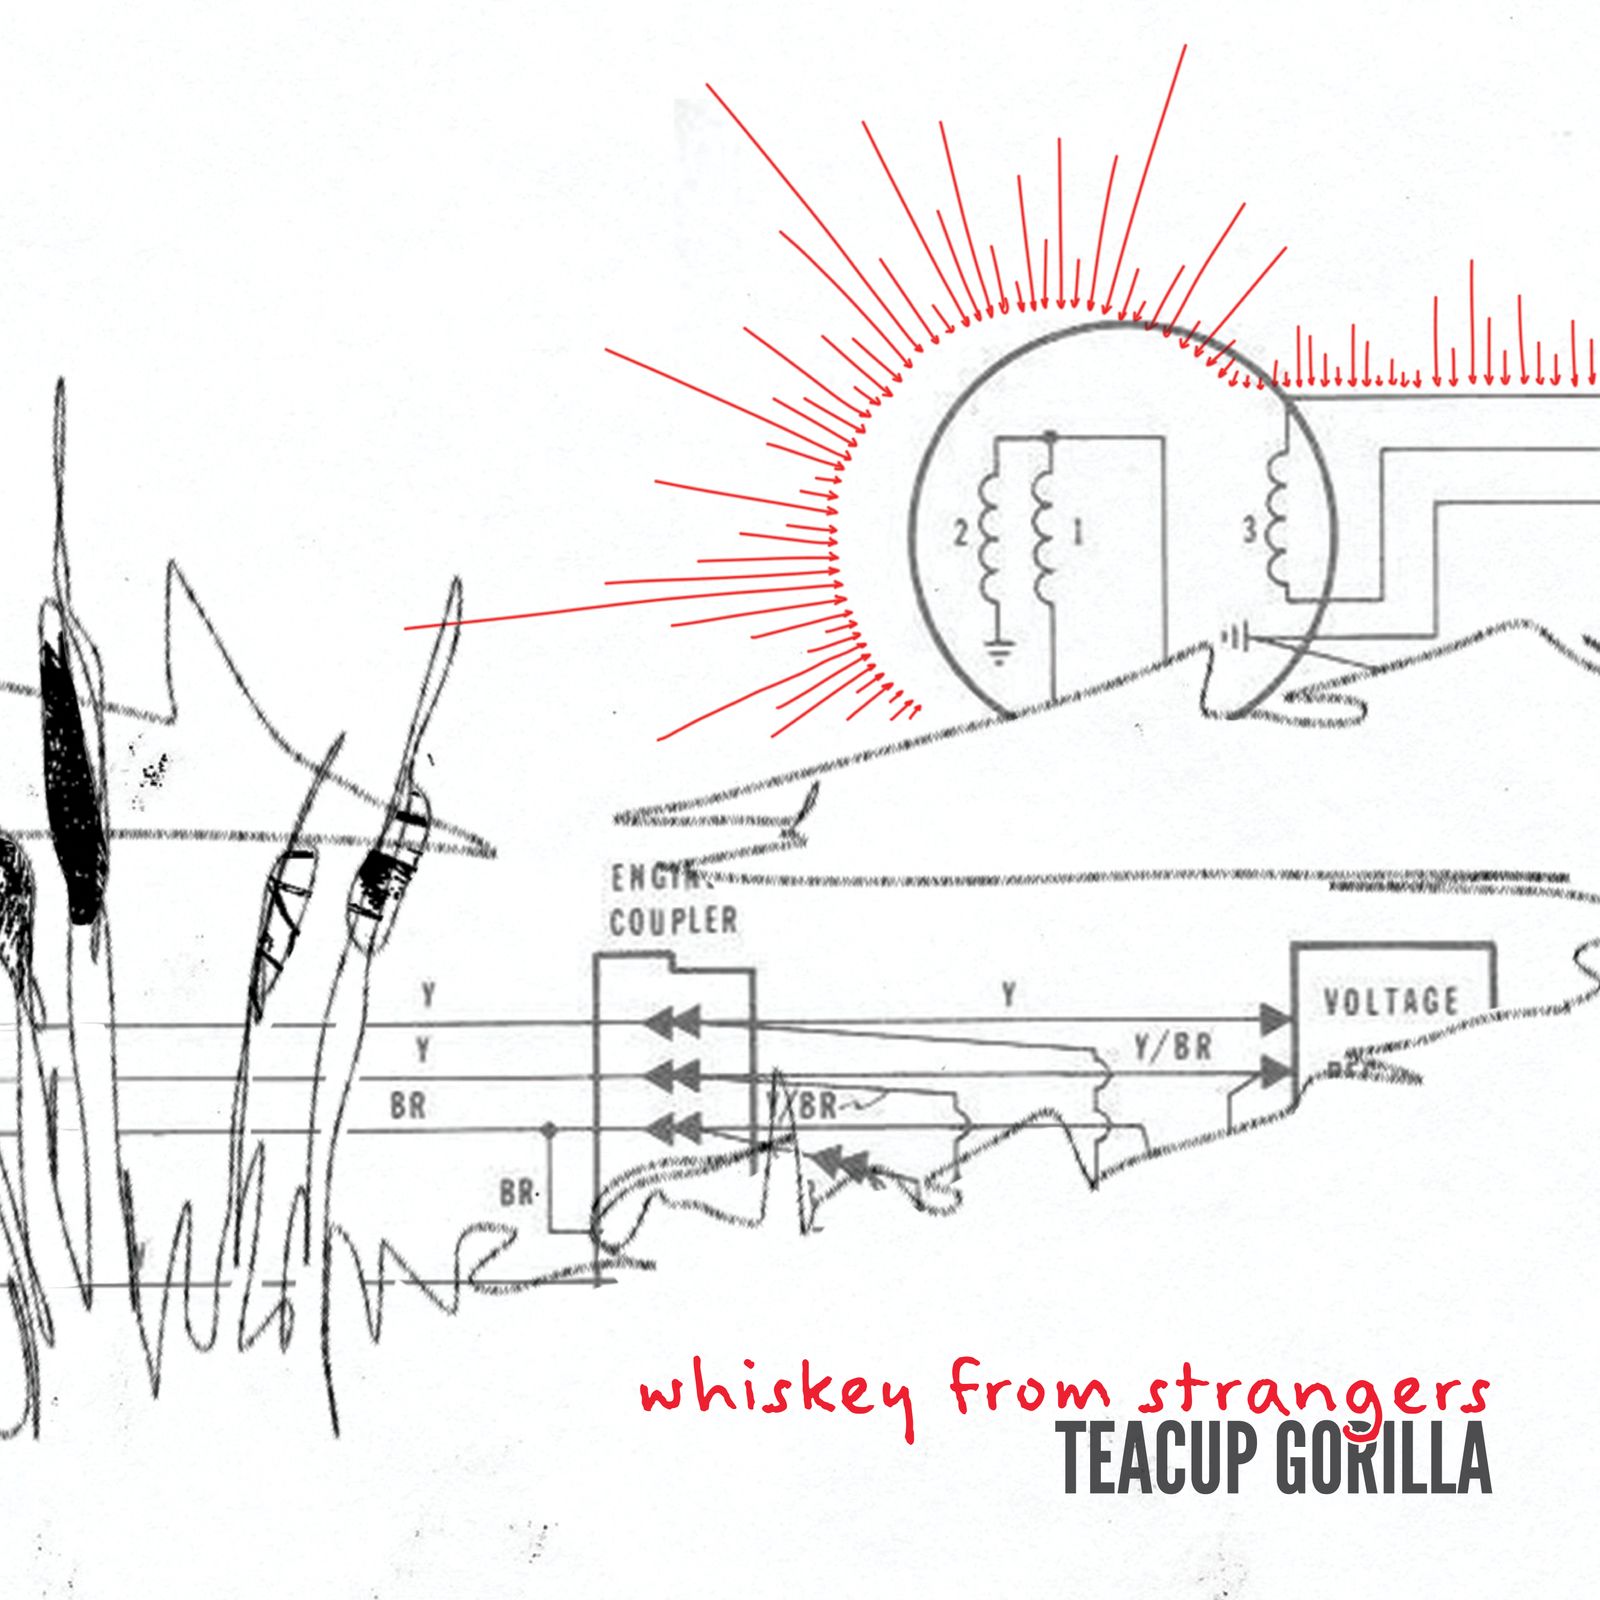 Album cover: A pond with cattail reeds and mountains, sketched in a single pencil line, with an electrical diagram sun reflecting in the water - small red arrows form rays pointing in at the sun
